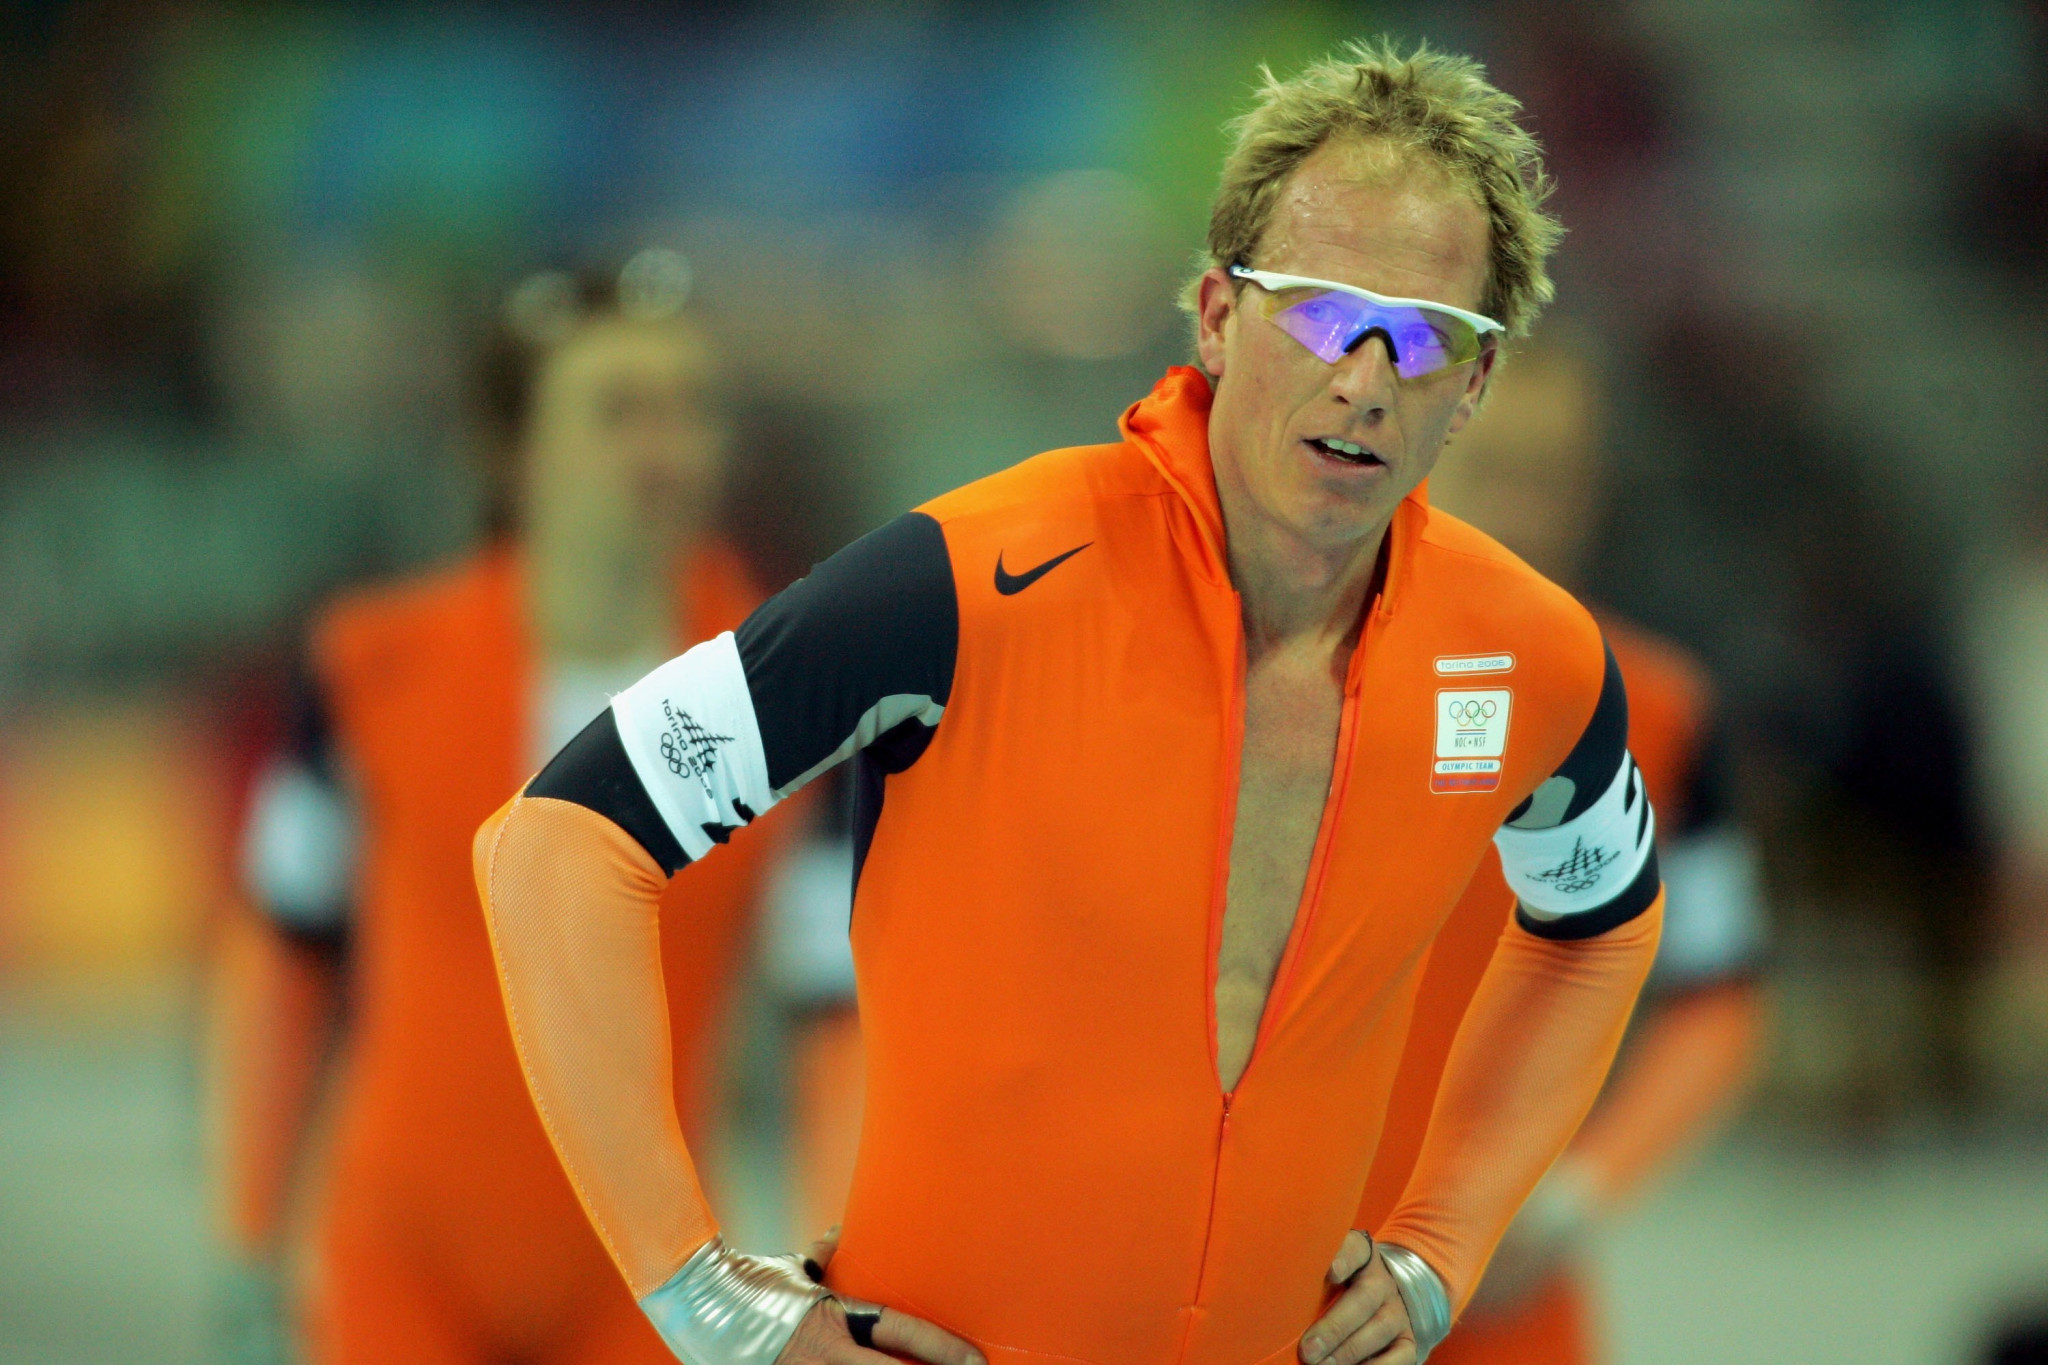 ISU criticised by top former Dutch speed skater after combining of World Championships